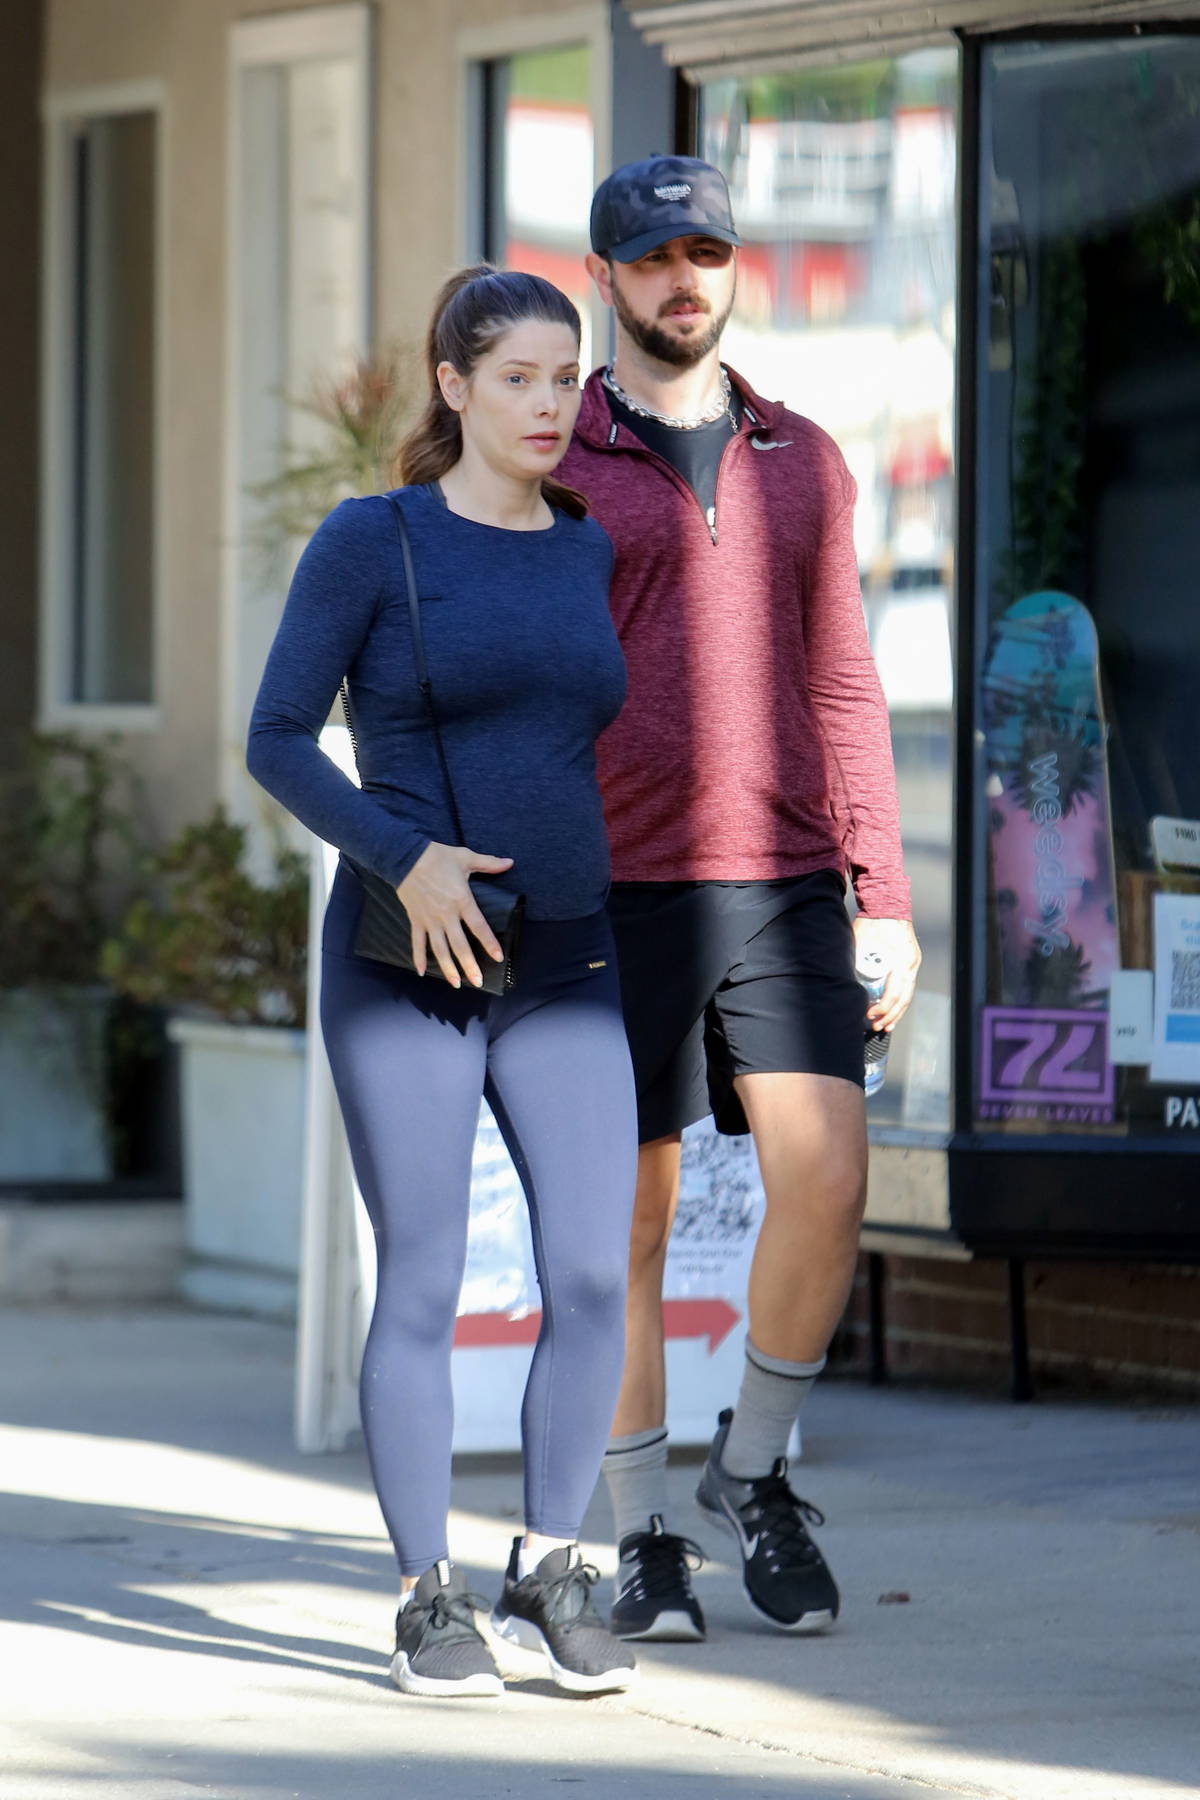 Ashley Greene shows her baby bump in a full-sleeve top and leggings while  heading for